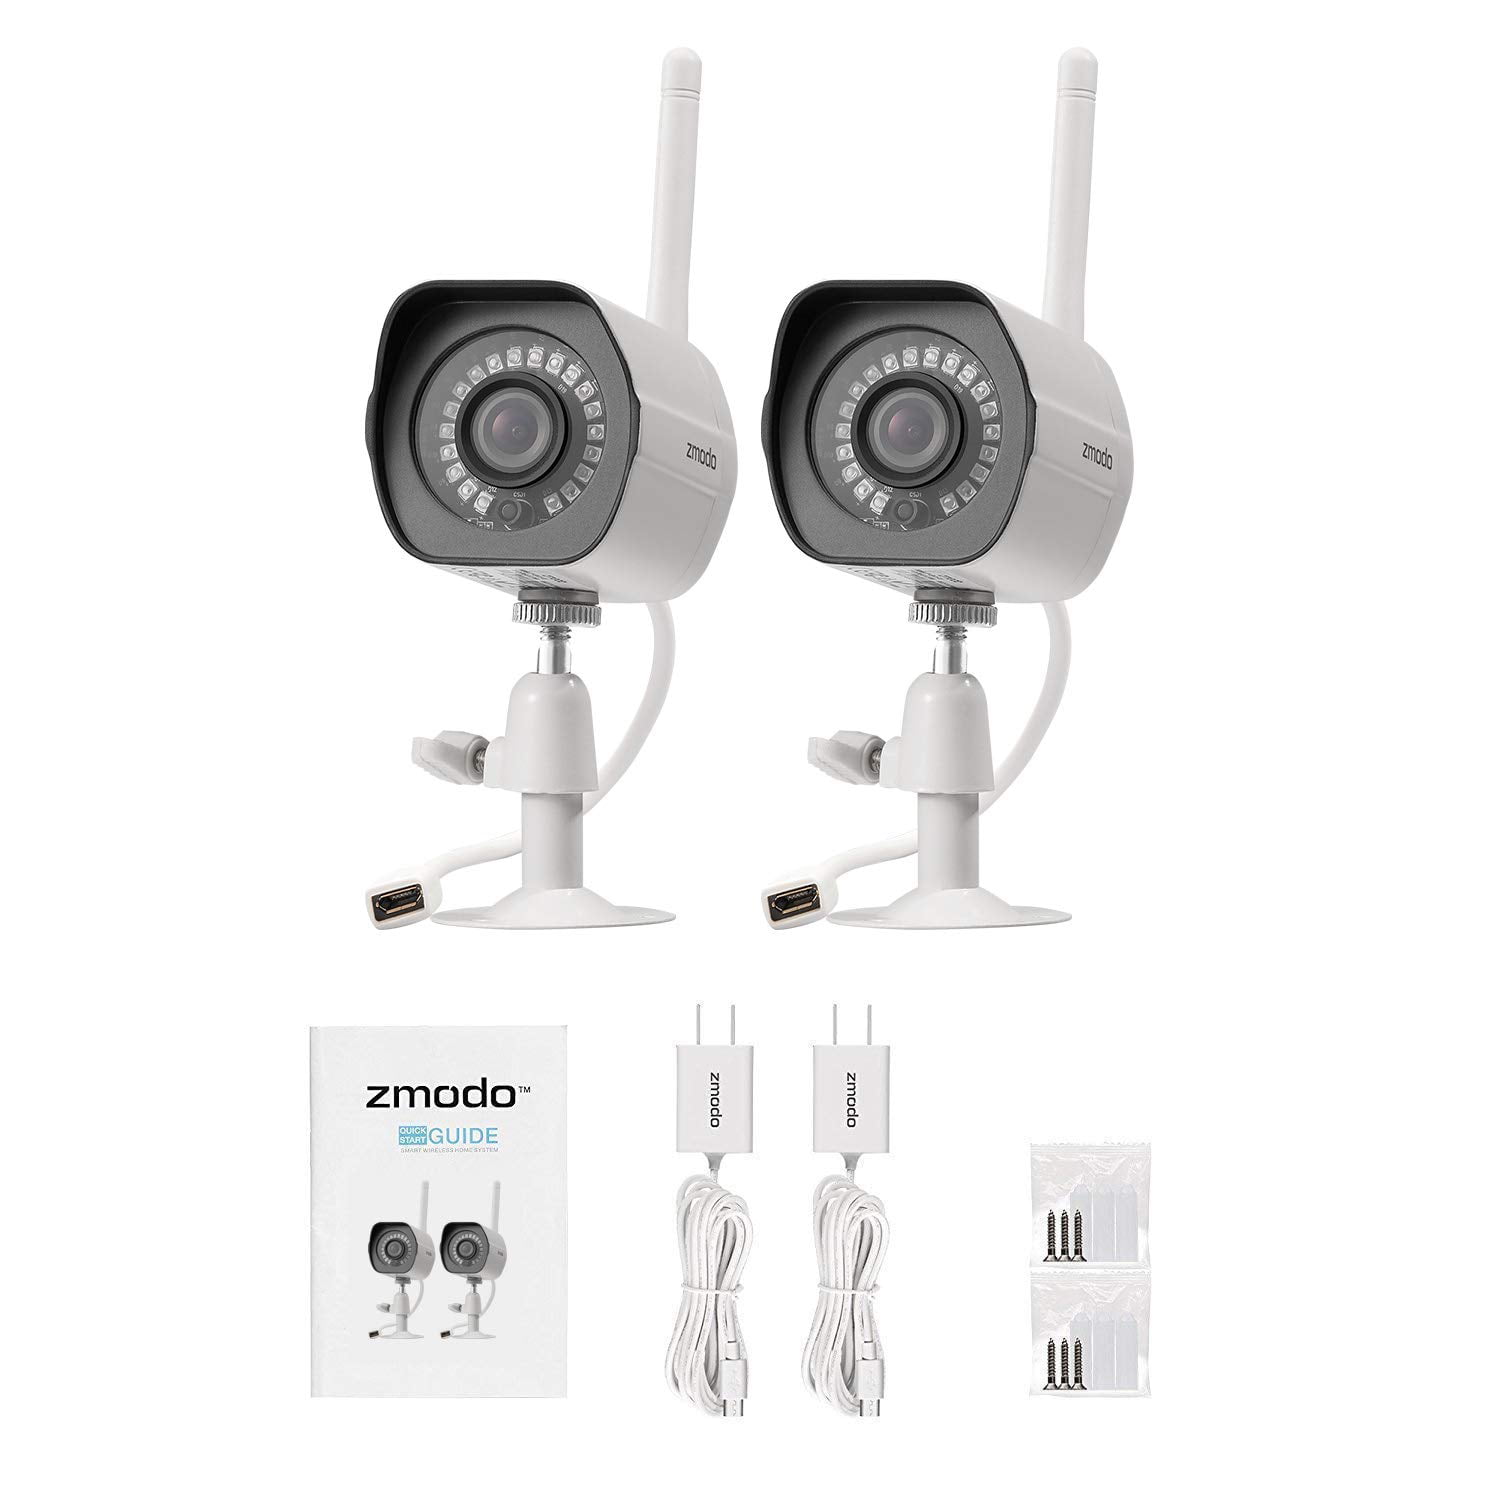 Zmodo 2 Pack Wireless Security Camera System Smart Outdoor WiFi IP